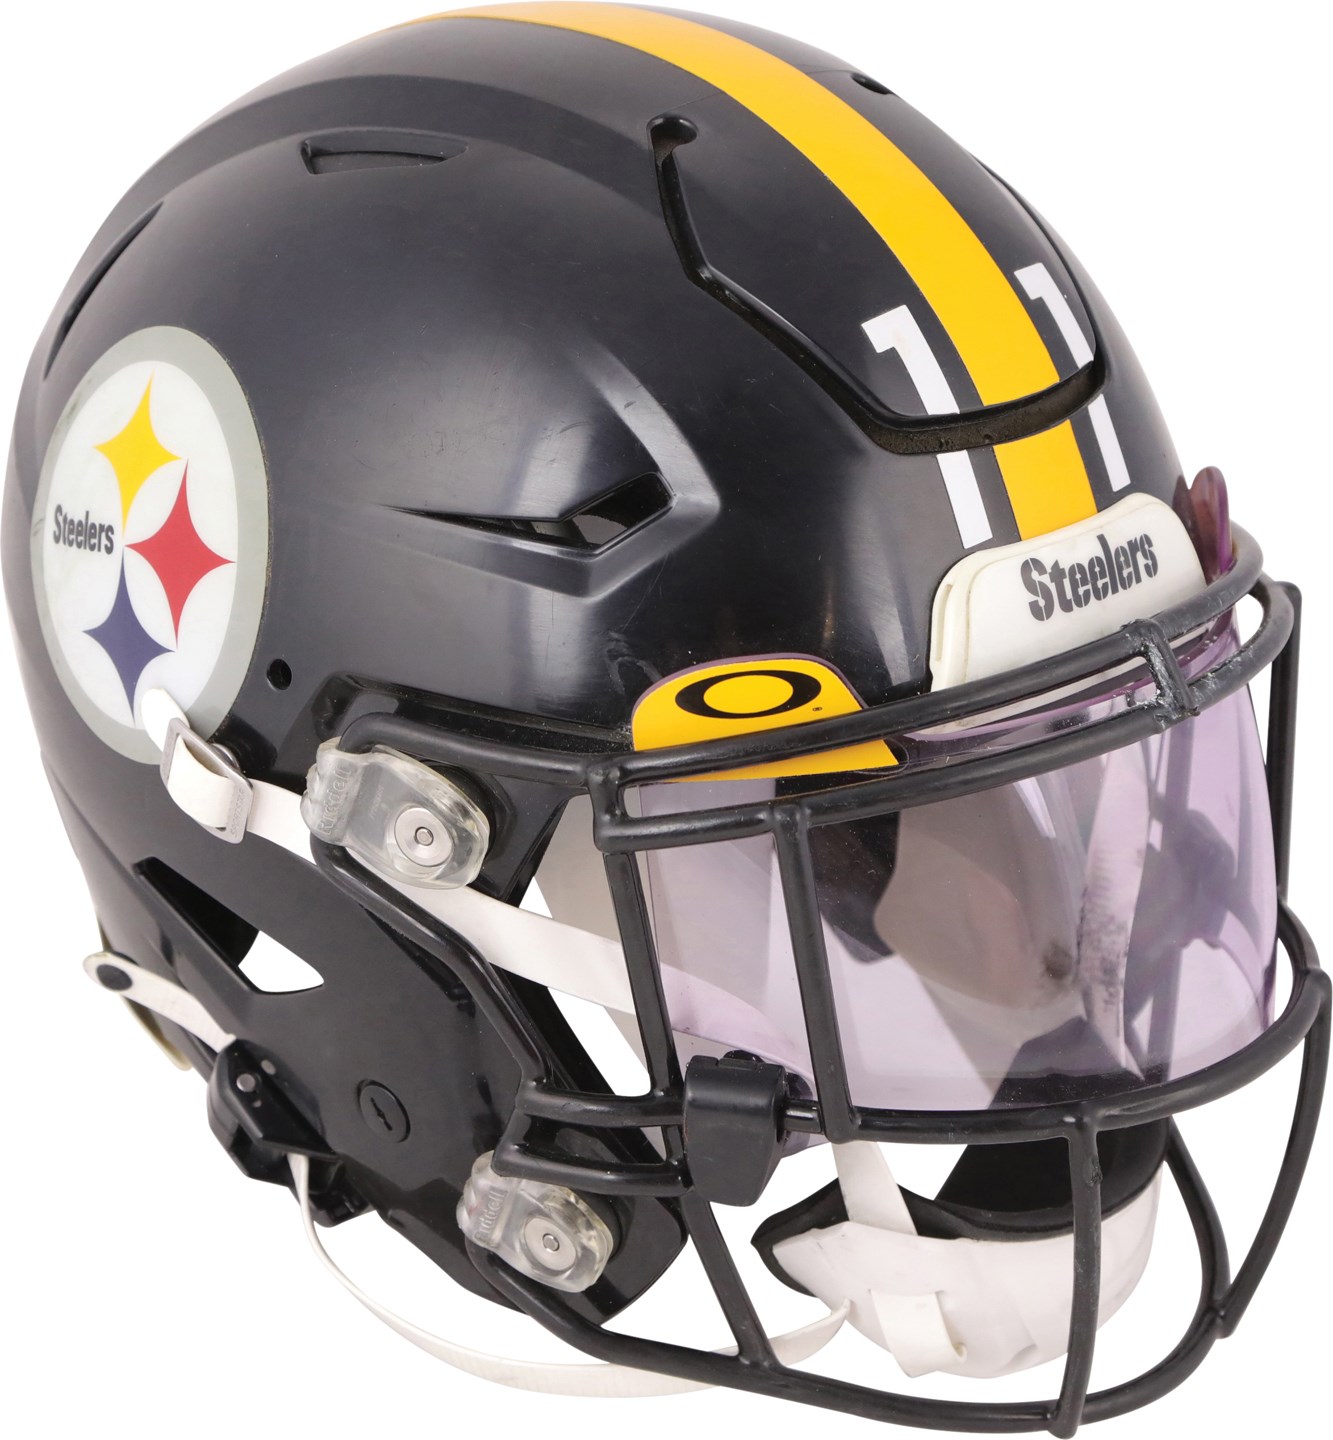 Football - 1/10/21 Chase Claypool Rookie AFC Wild Card Pittsburgh Steelers Game Worn Helmet - Season Long Use Photo-Matched to SIX Games and 4 TDs! (Photo-Matched & Steelers COA)